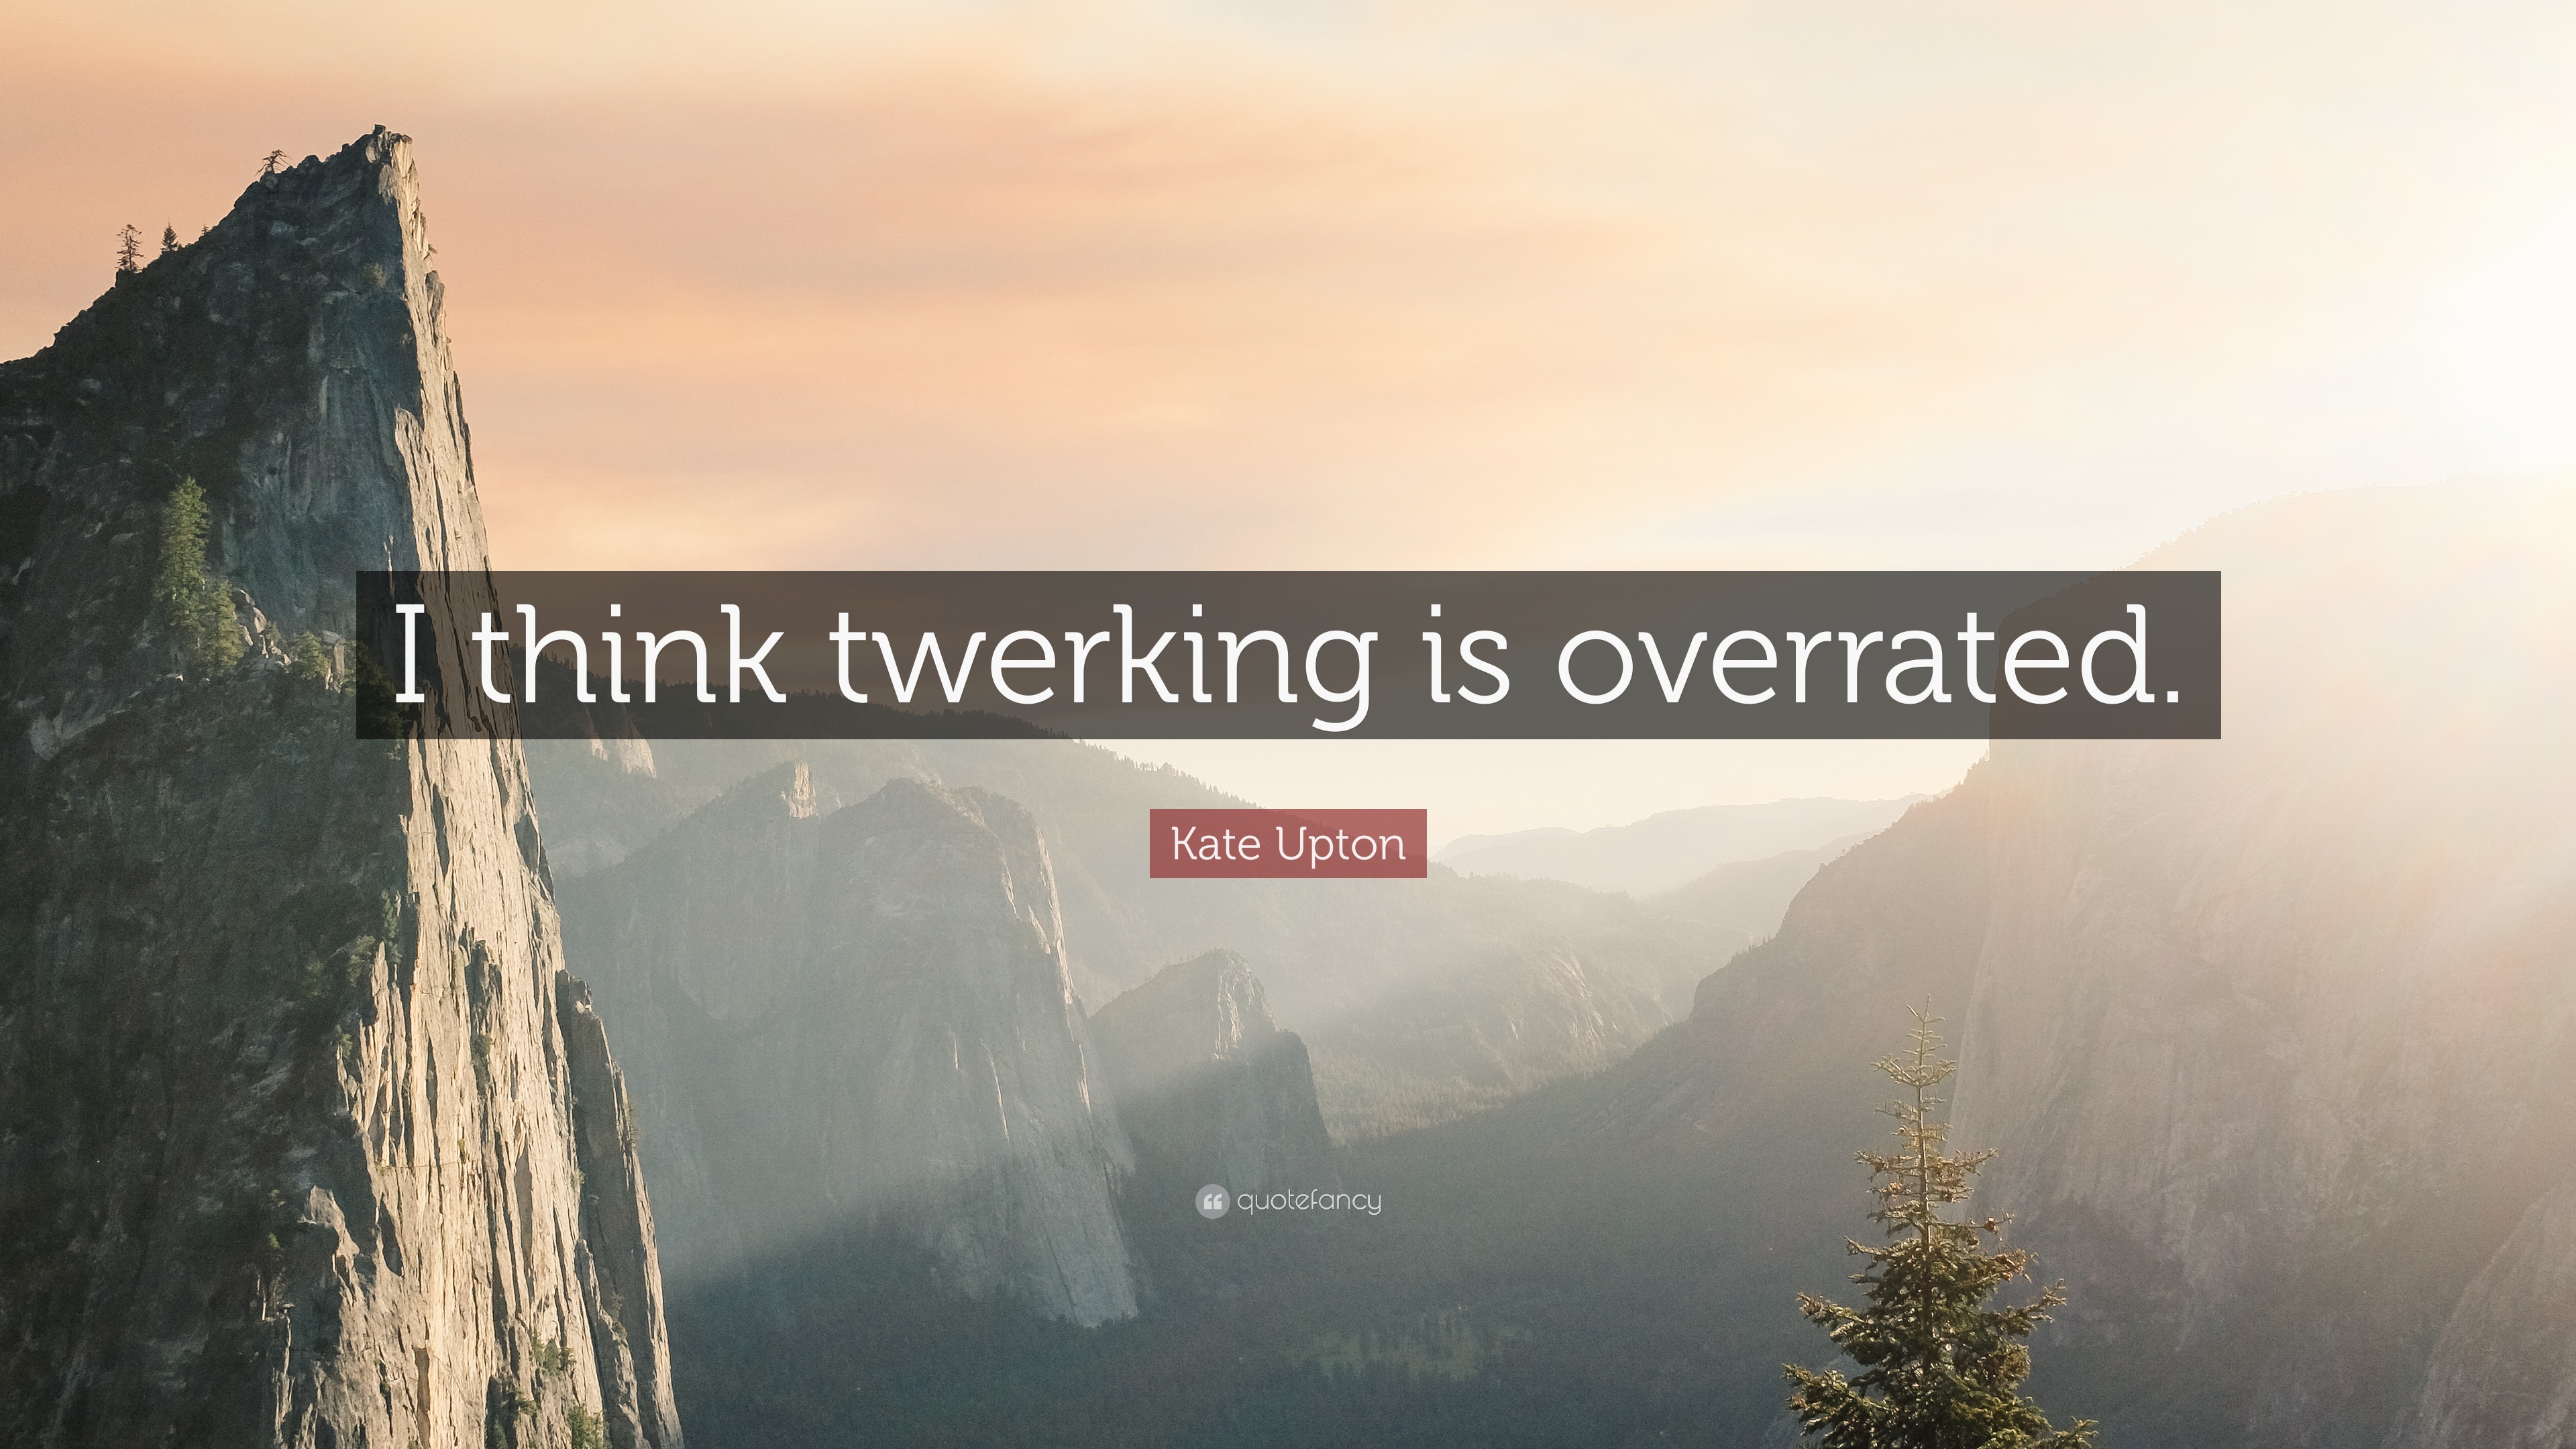 Kate Upton Quote: “I think twerking is overrated.” 7 wallpaper